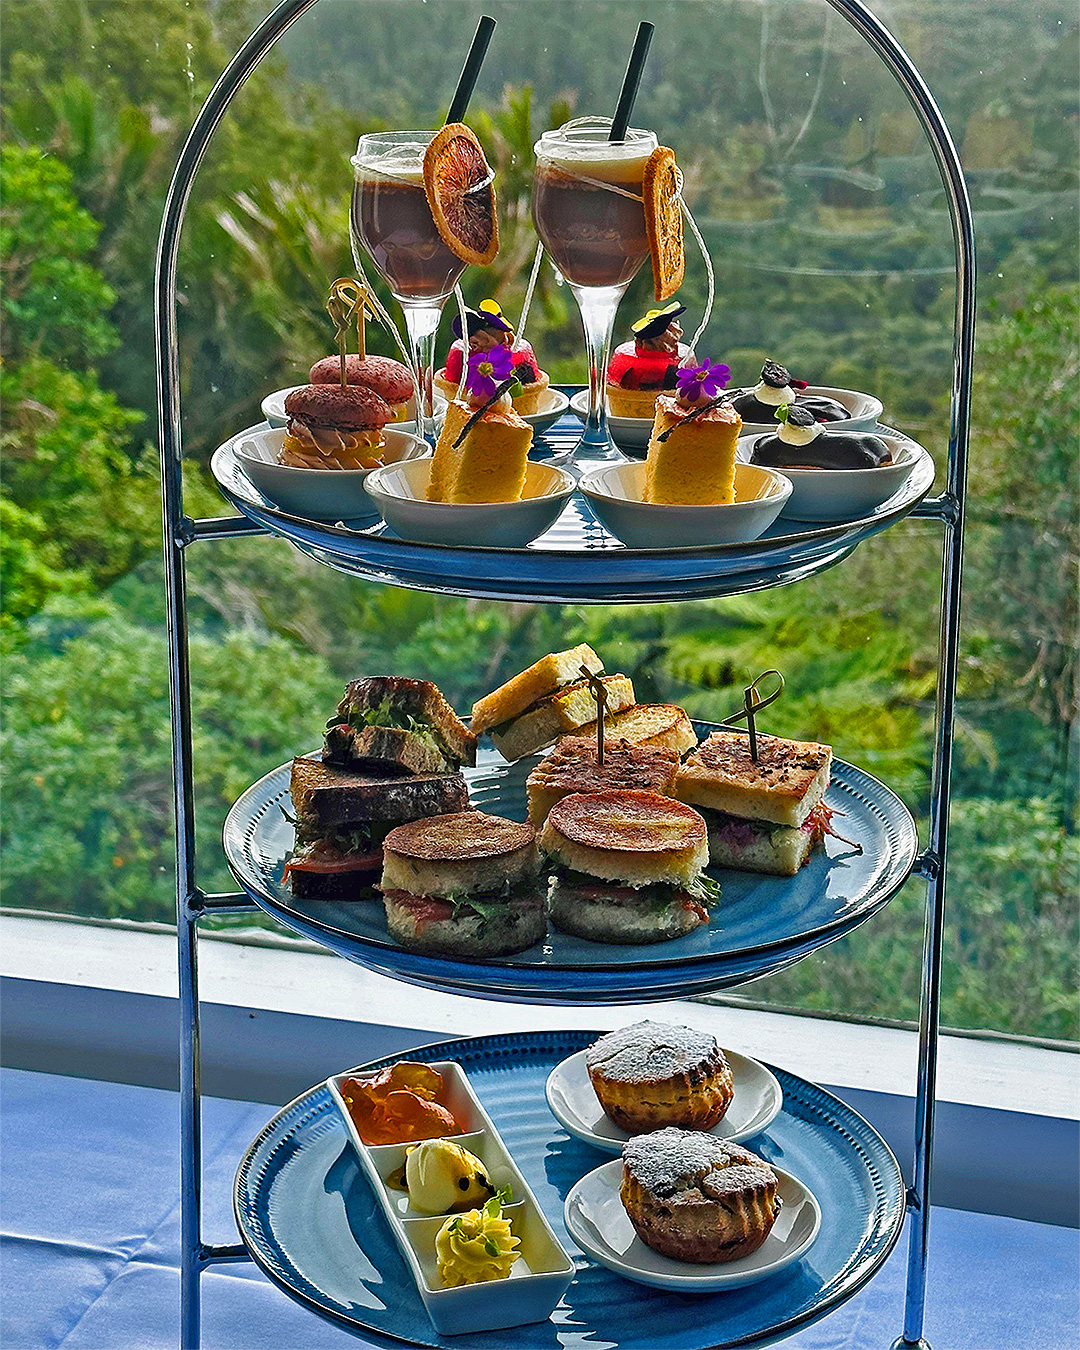 Delicate high tea fancies sit on tiers overlooking a great view at Waitakere Resort and Spa.